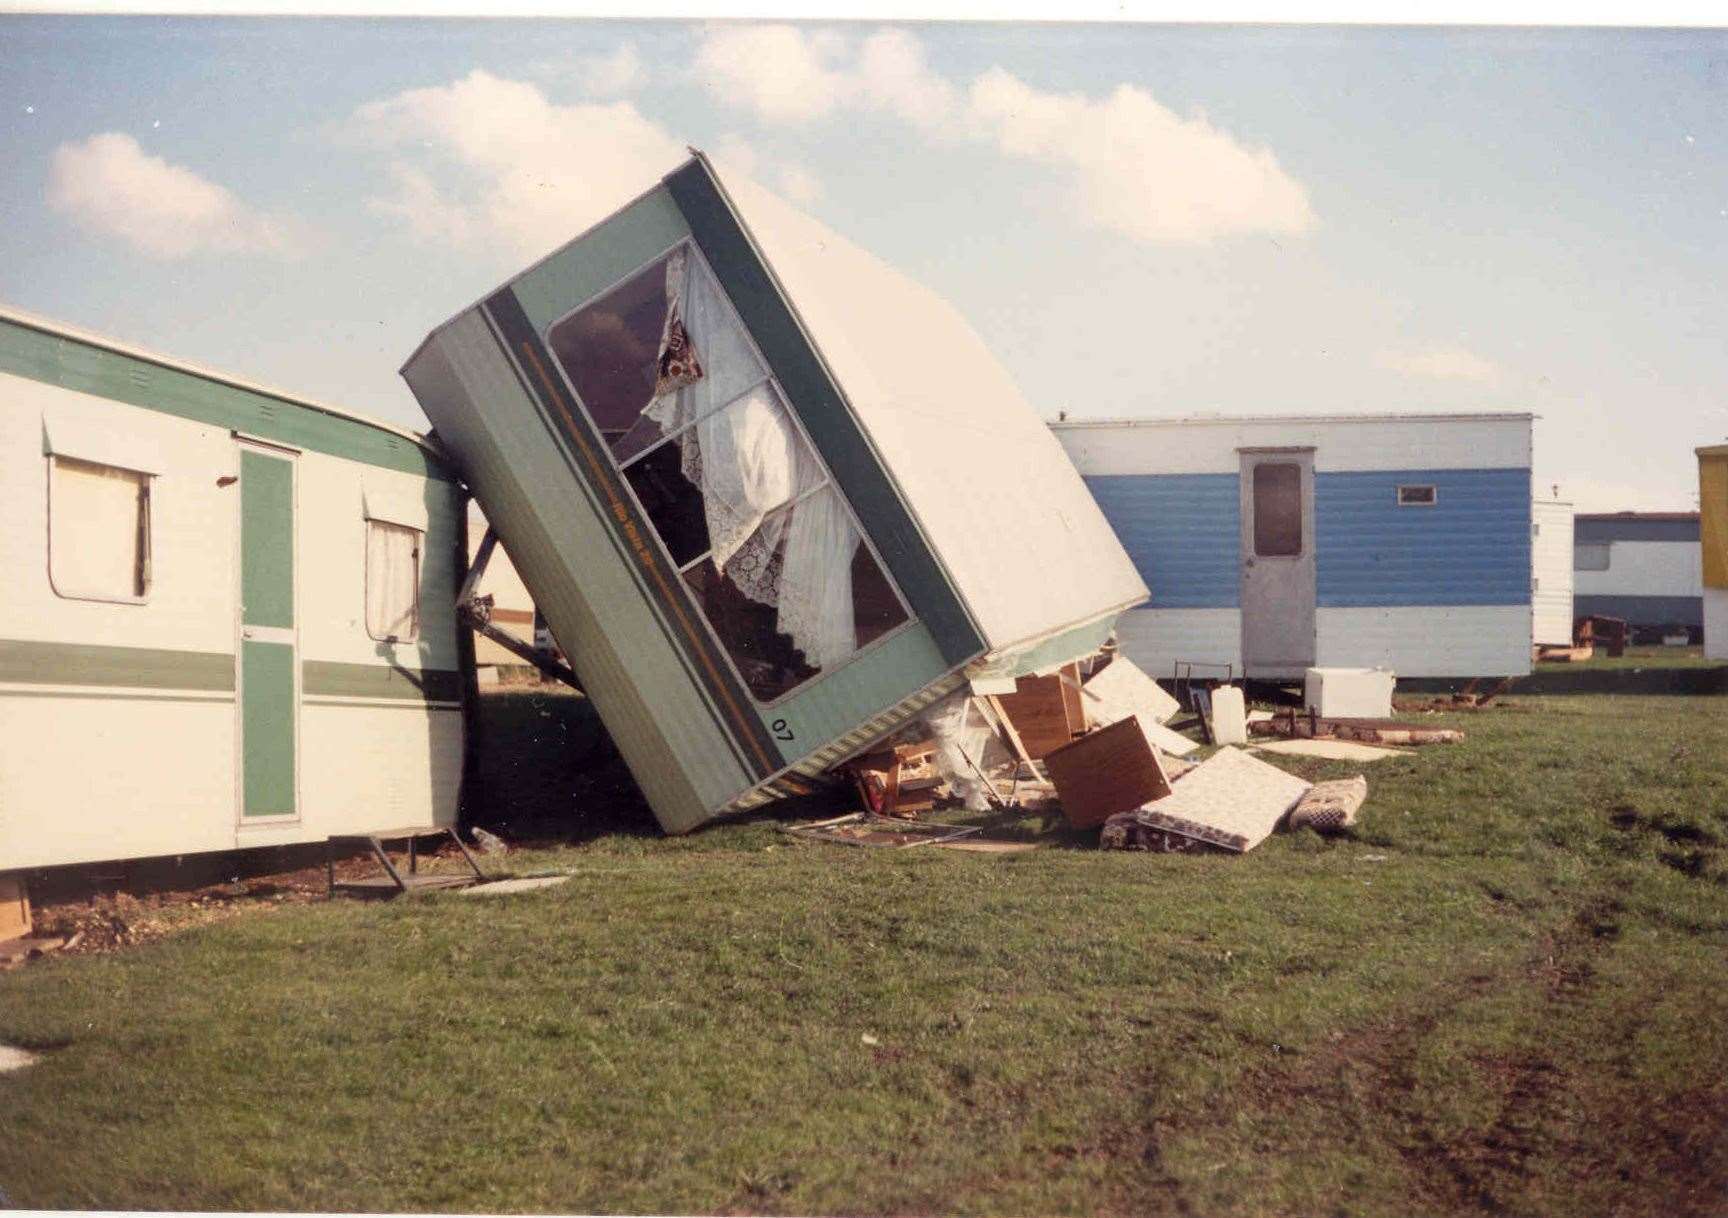 Damage caused by the Great Storm of 1987 in Allhallows Caravan Park